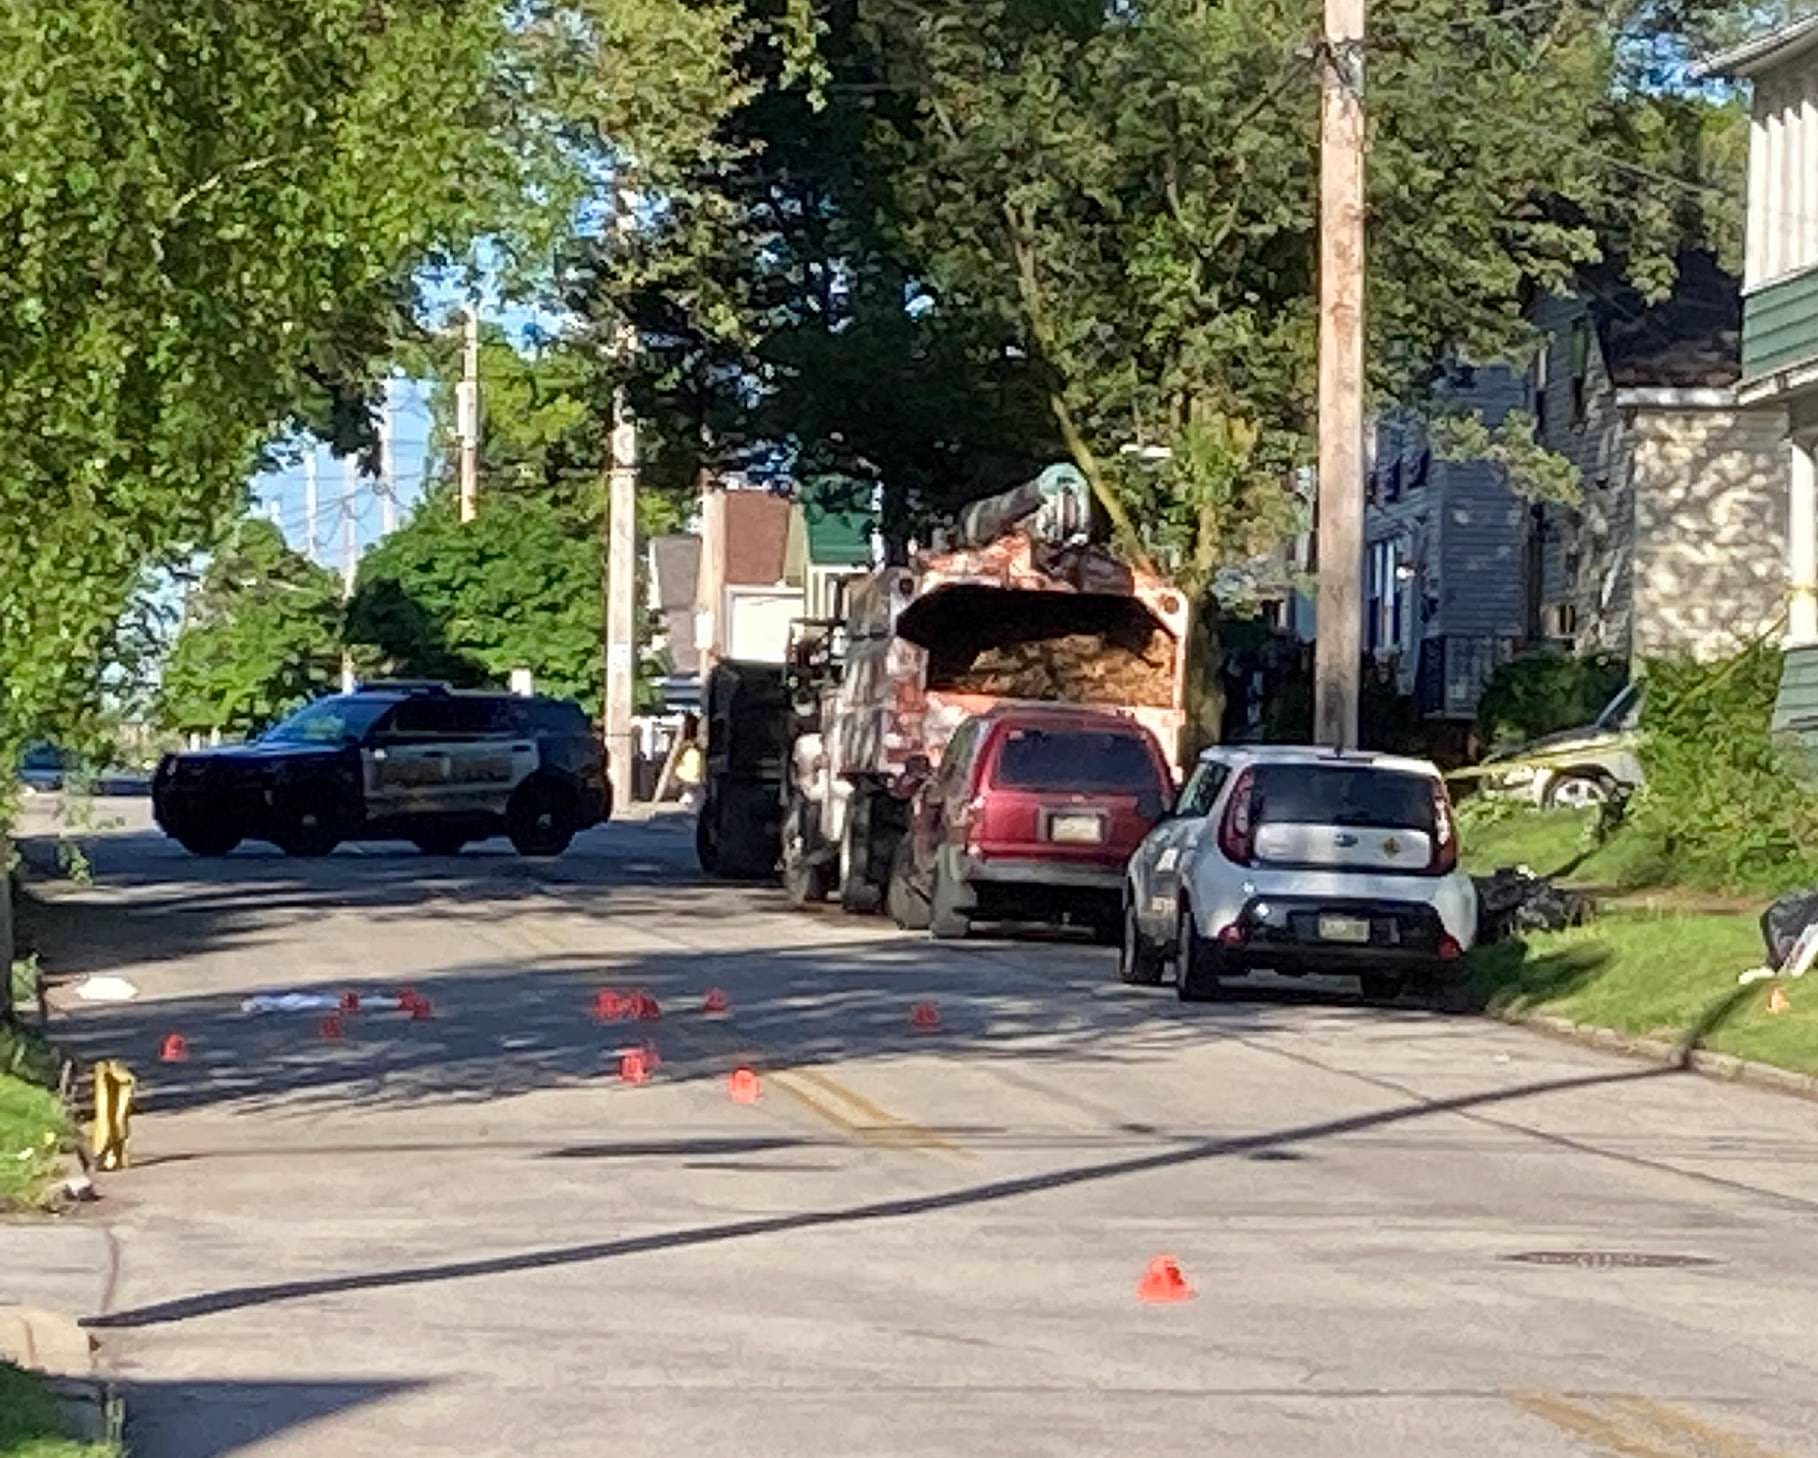 Deadly day in Erie: 2 killed in car-motorcycle crash hours after fatal accident, shooting